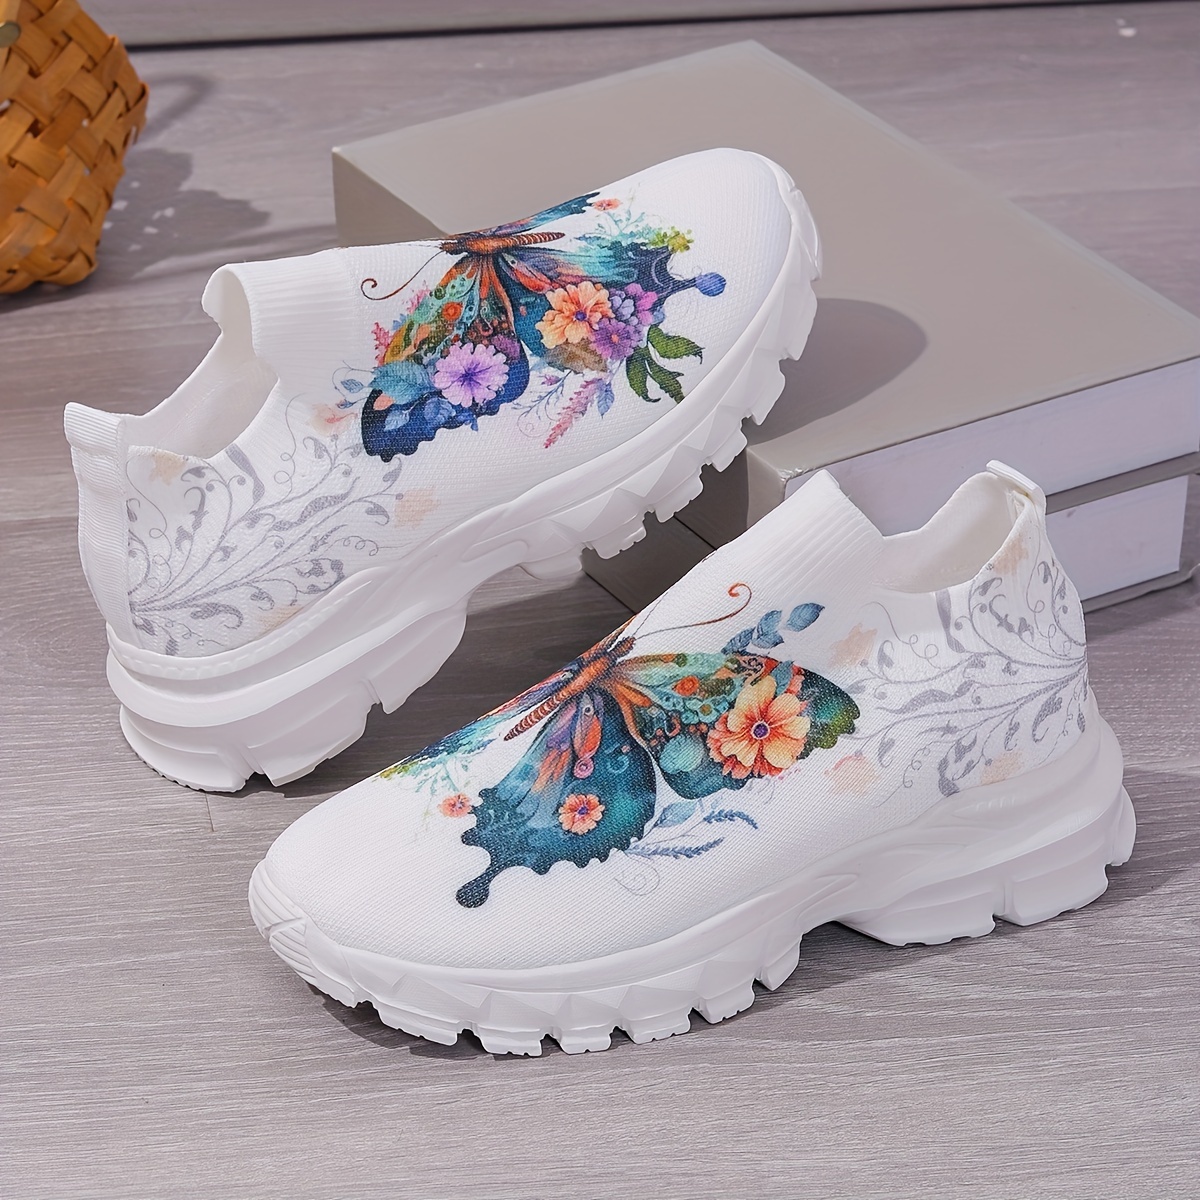 

Women's Floral Butterfly Print Sock Sneakers, Comfortable Fabric Slip-on Shoes, Breathable Fashion Trainers For Daily Wear